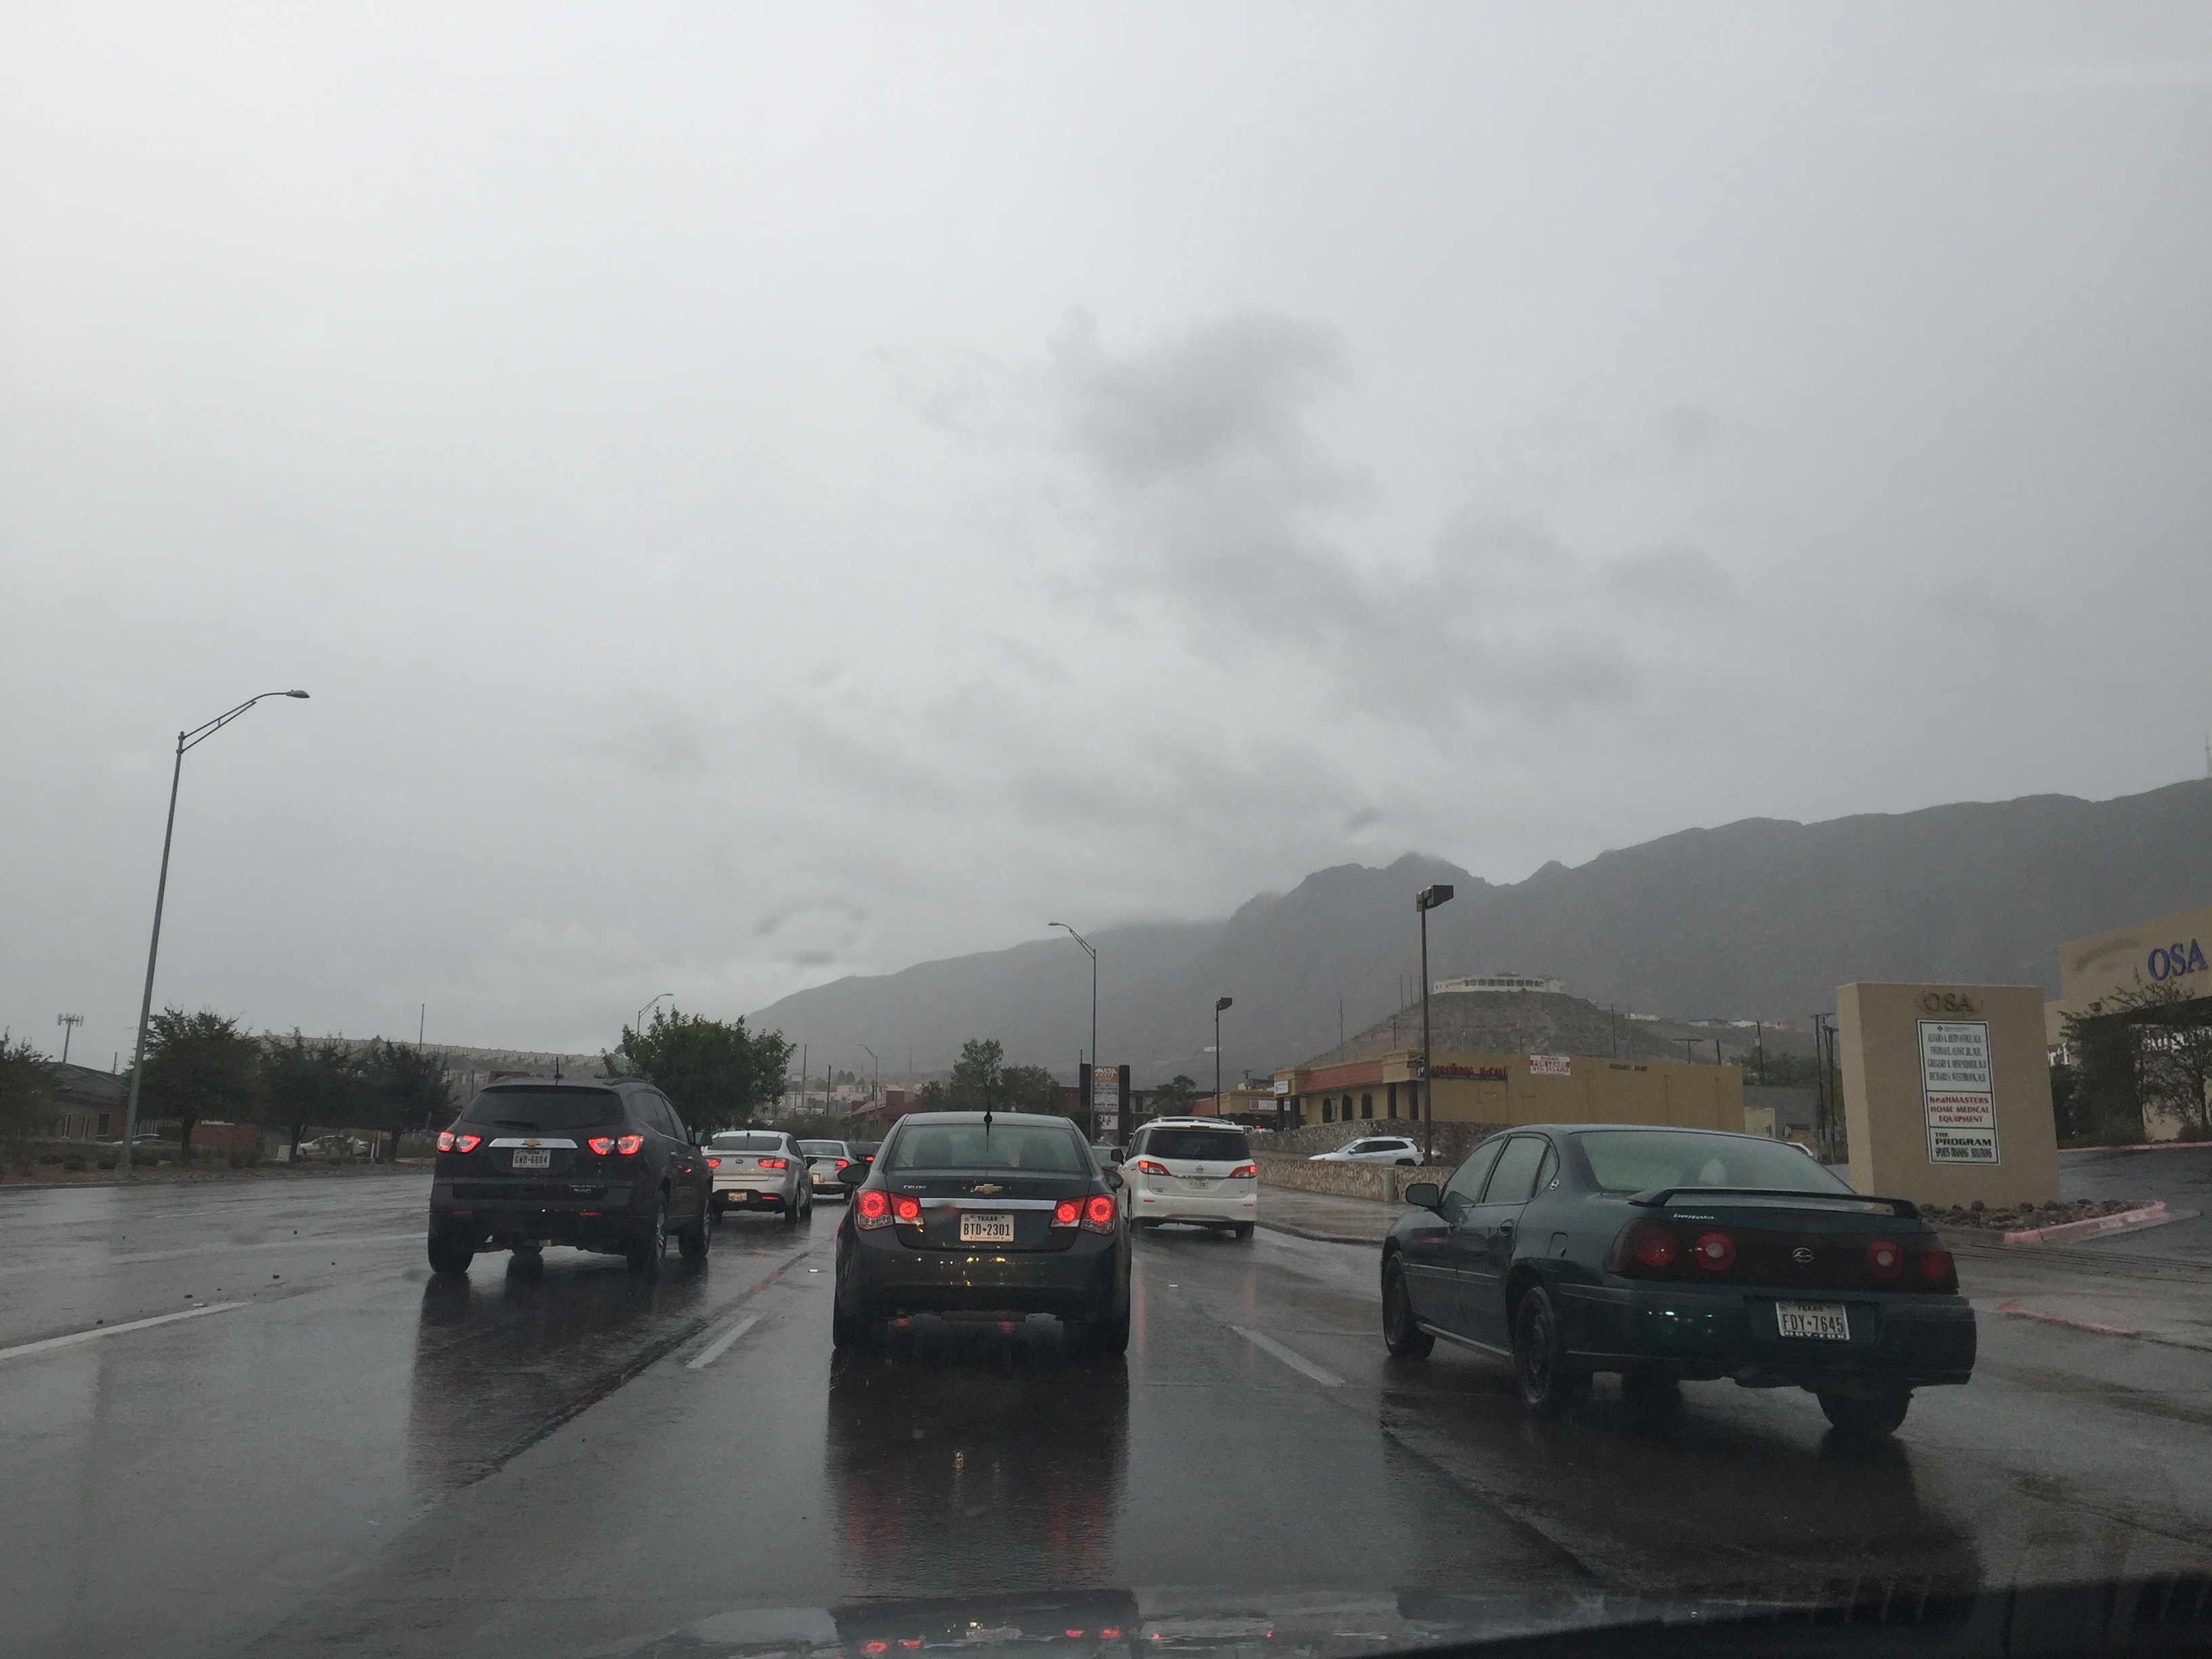 North Mesa Street, El Paso, Texas. We enjoyed the ride back home from work because it was raining: dibble dibble dibble dop.